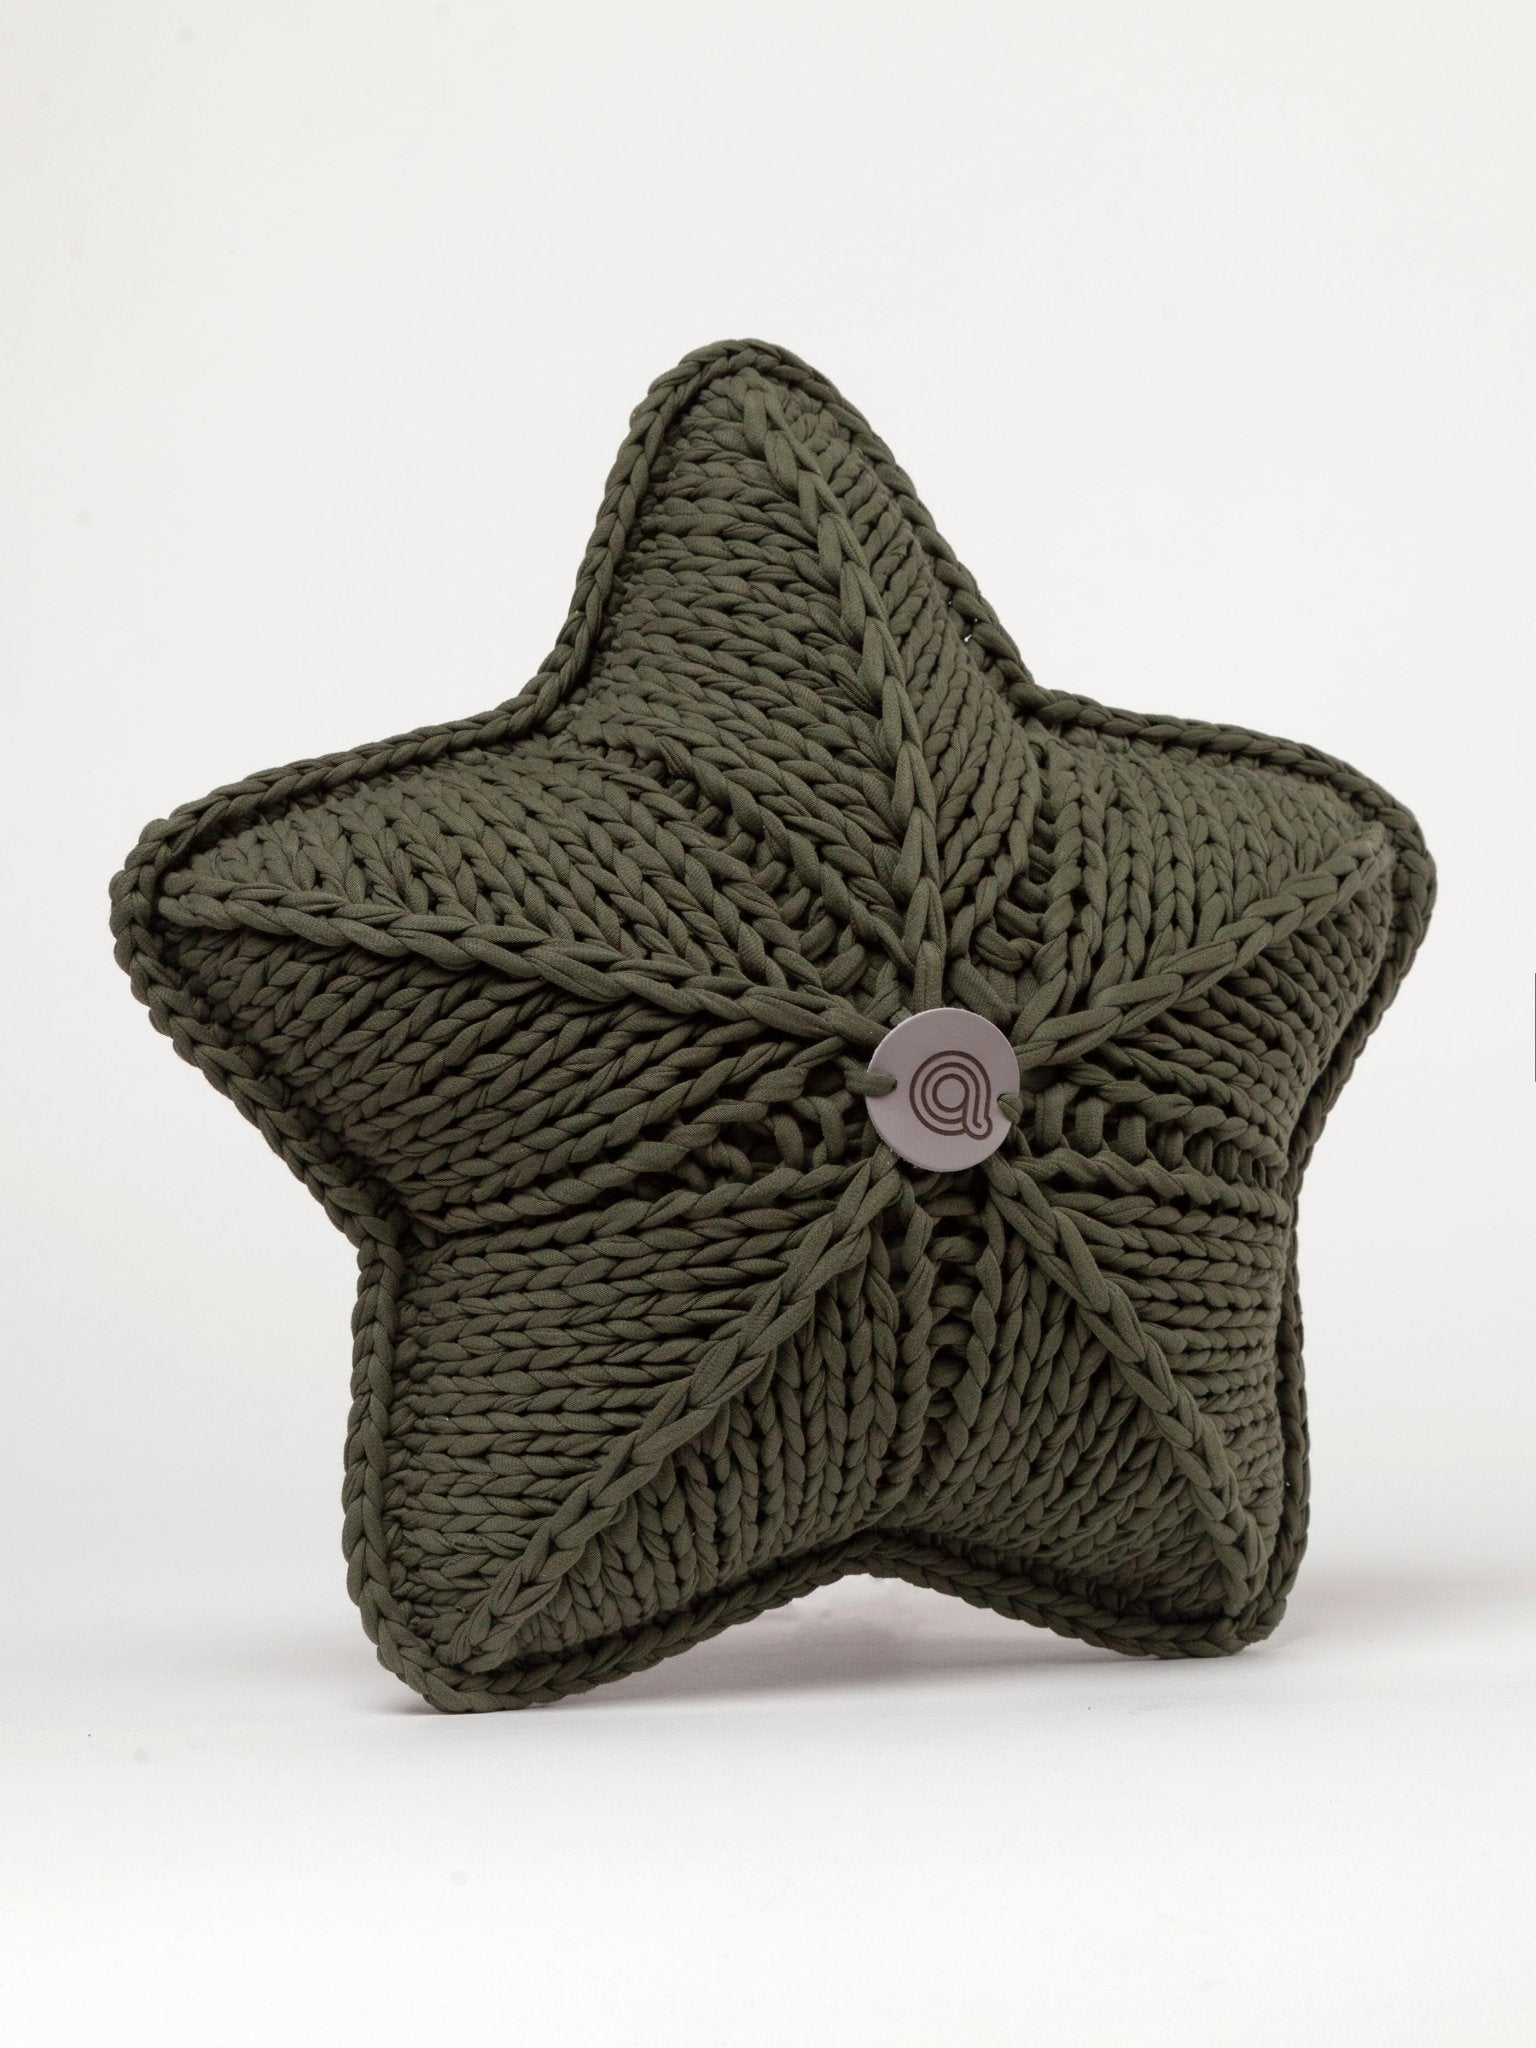 STAR-SHAPED HANDKNIT ACCENT PILLOW - The Modern Heritage